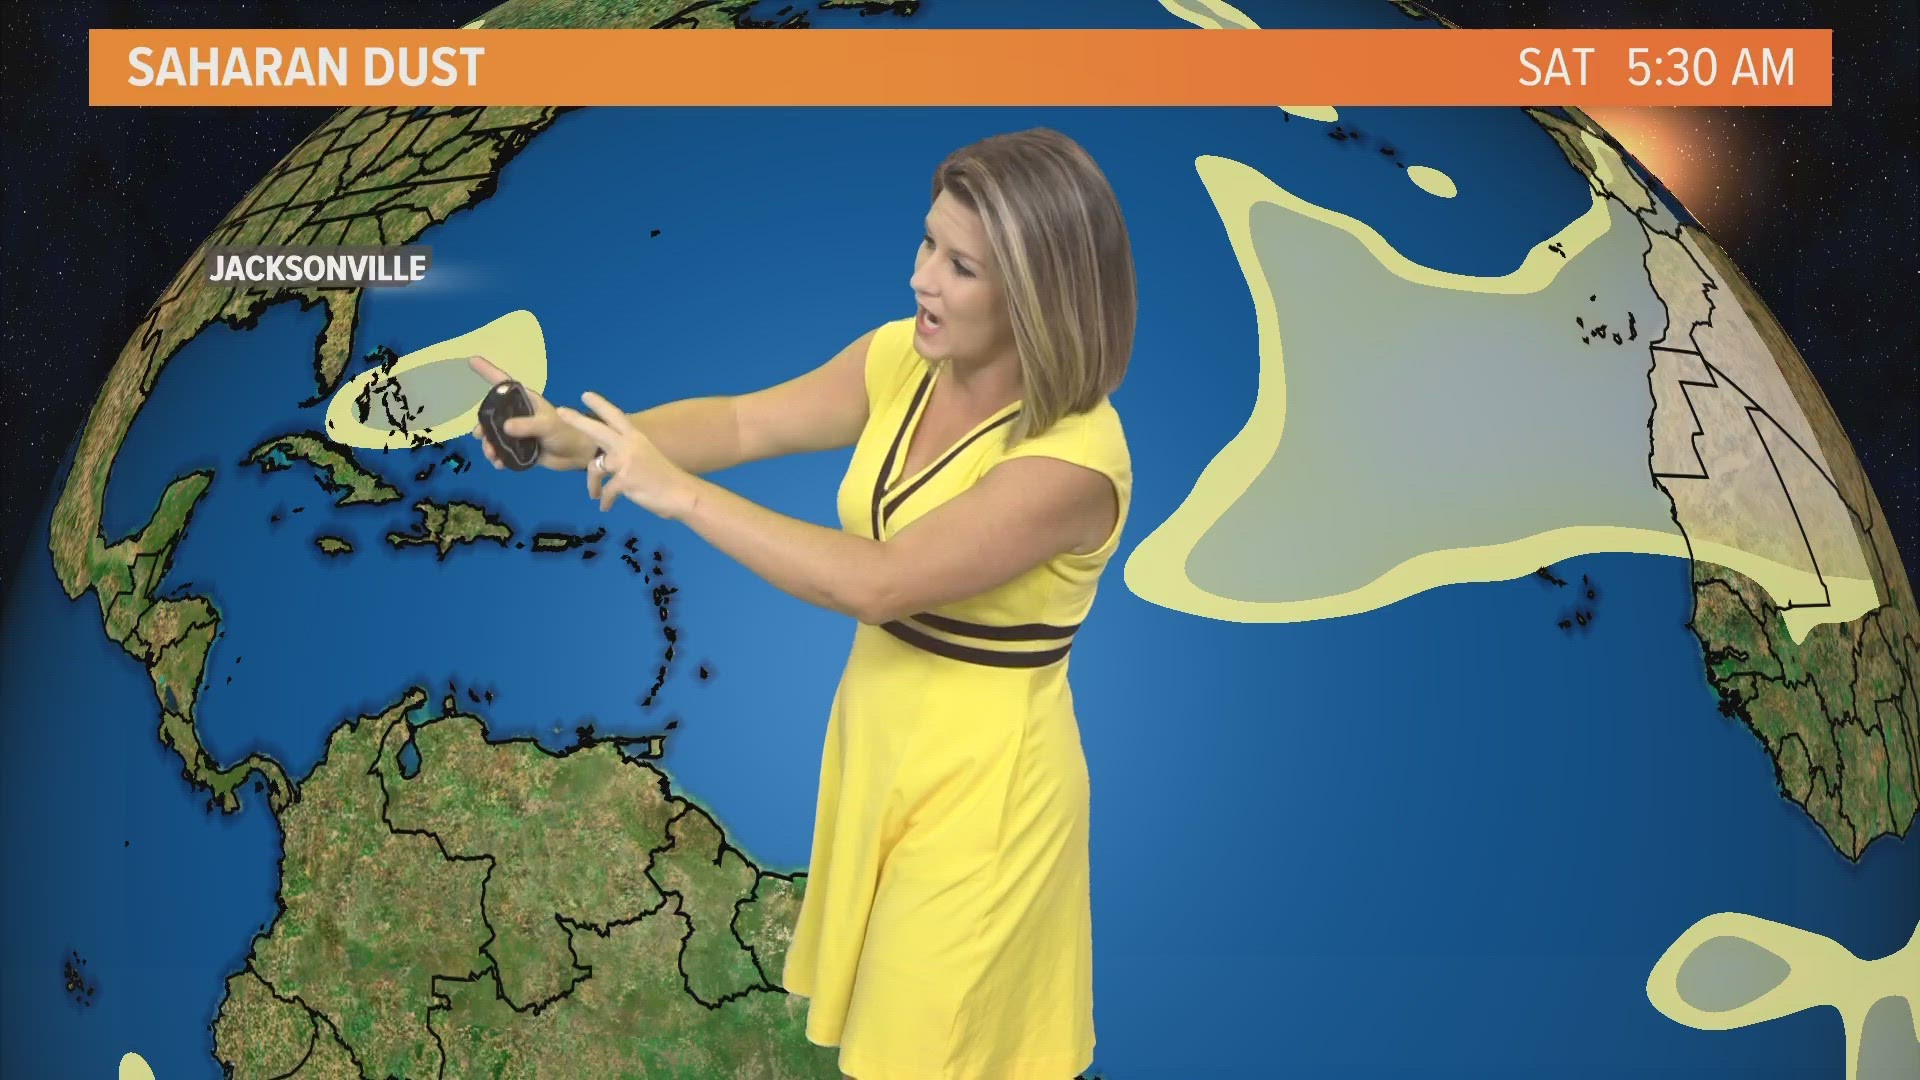 Meteorologist Lauren Rautenkranz says the dust plume will move over the Bahamas and portions of Florida as early as Saturday.